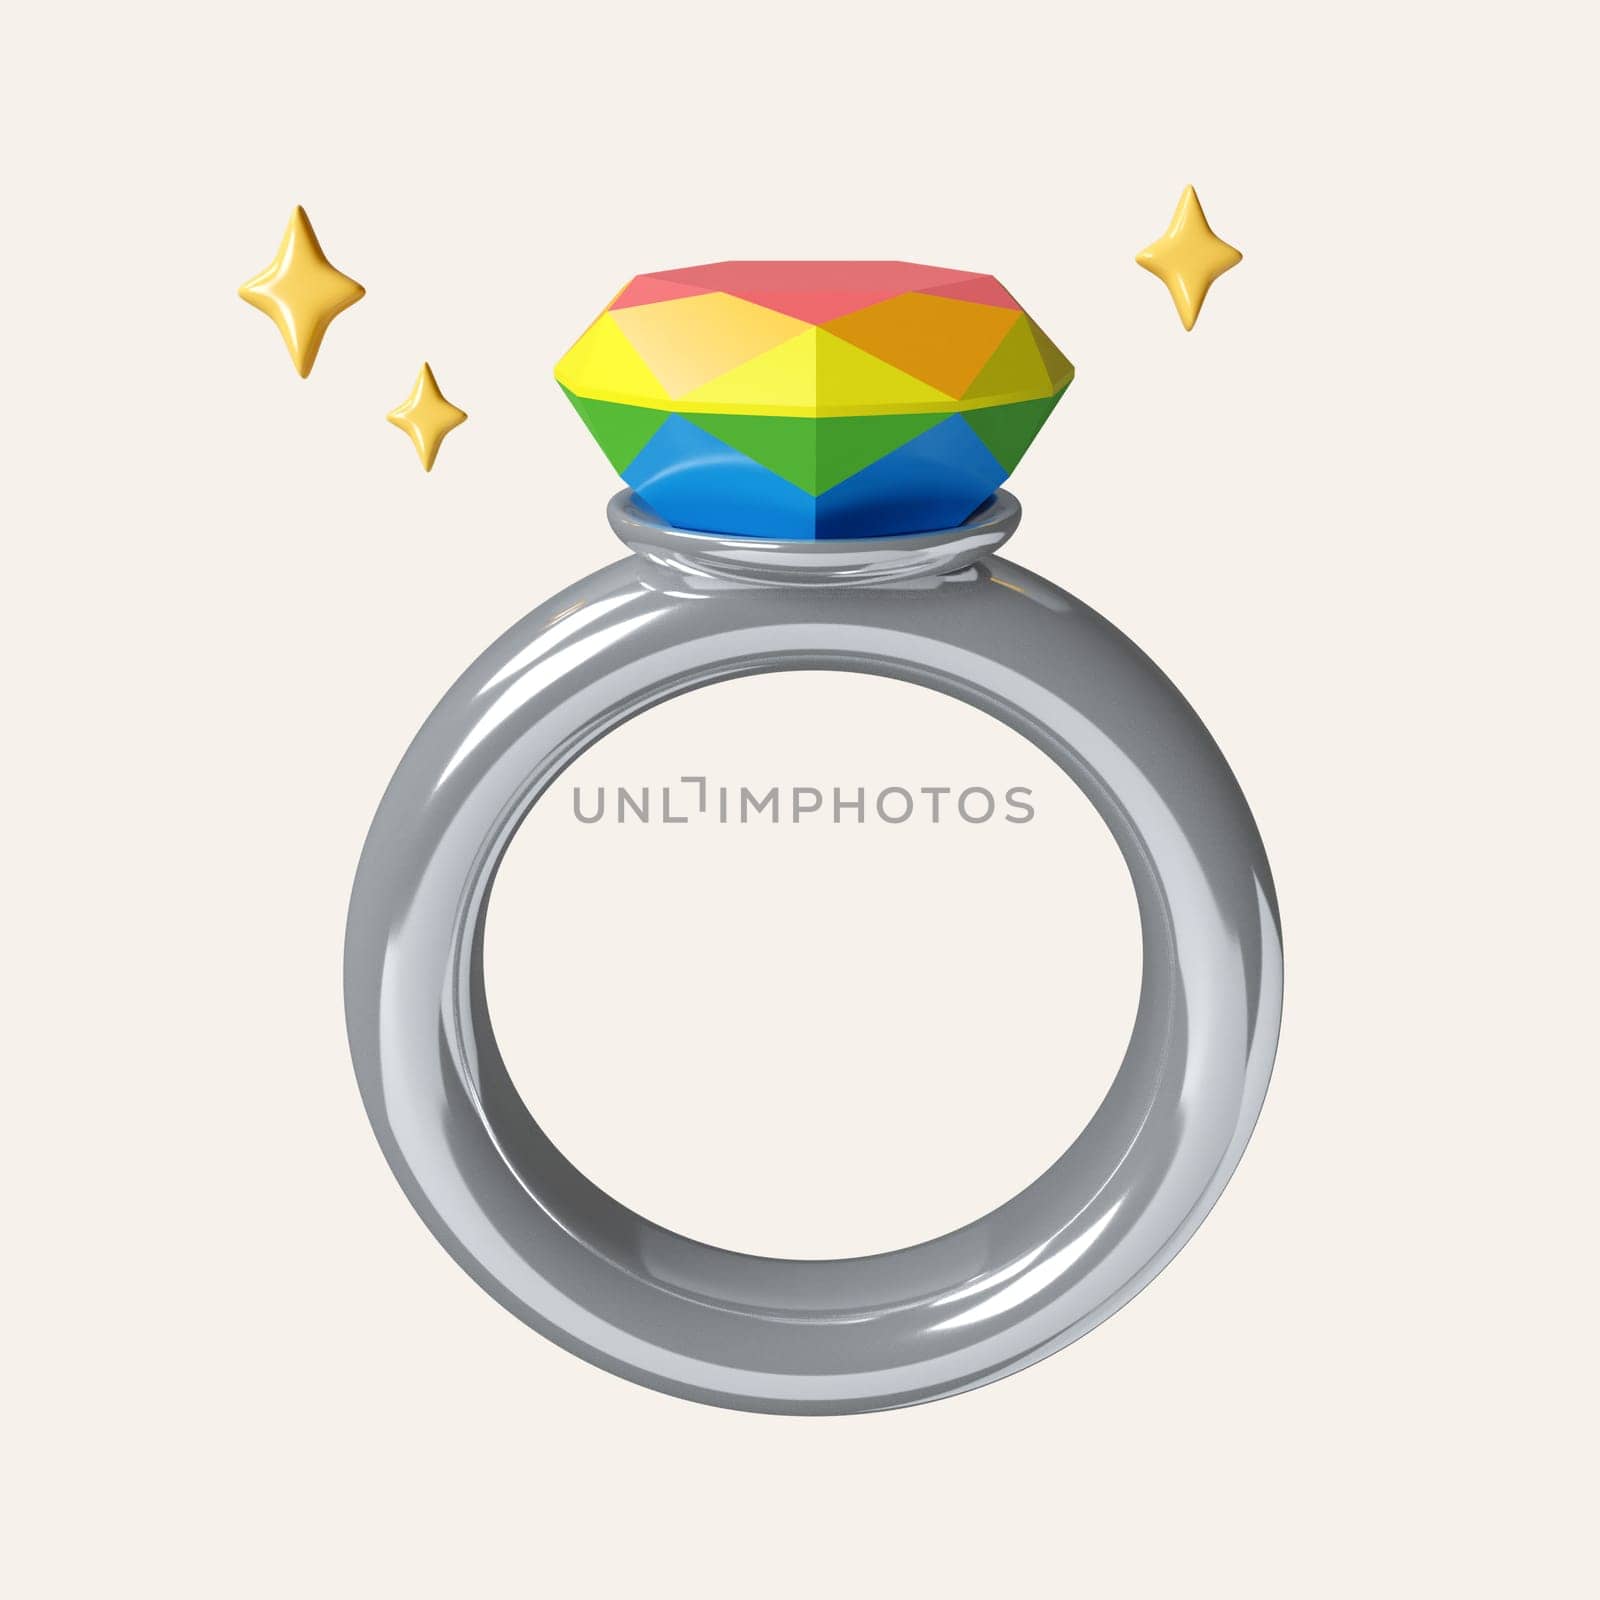 3d A LGBT jewelry ring. Marriage flying metal rainbow lgbt rings. icon isolated on white background. 3d rendering illustration. Clipping path. by meepiangraphic